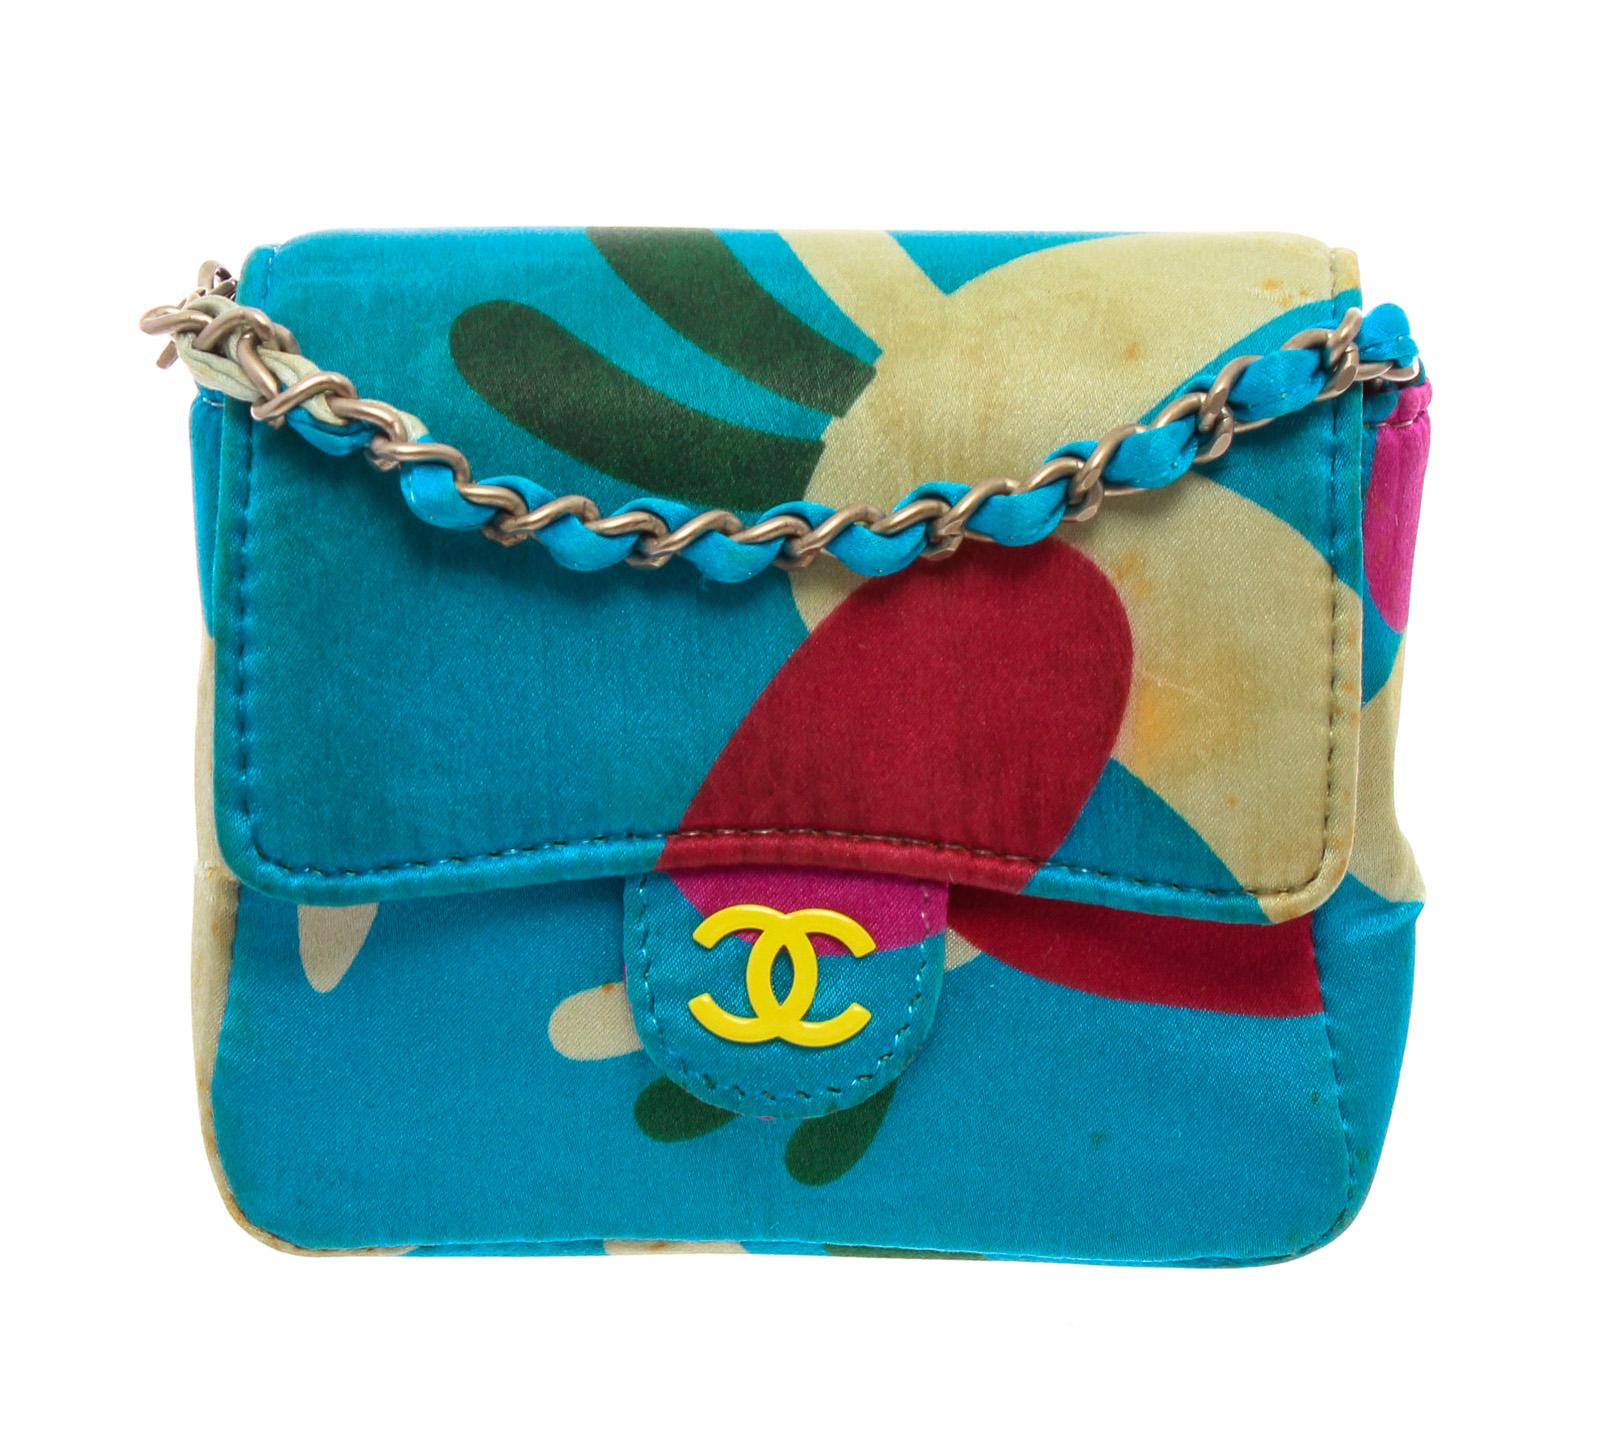 Chanel Blue Multicolor Satin Mini Messenger Pouch features a satin multicolor print with a belt loop on the back and has a detachable chain strap that can be wornover your shoulder. 

21929MSC MLA